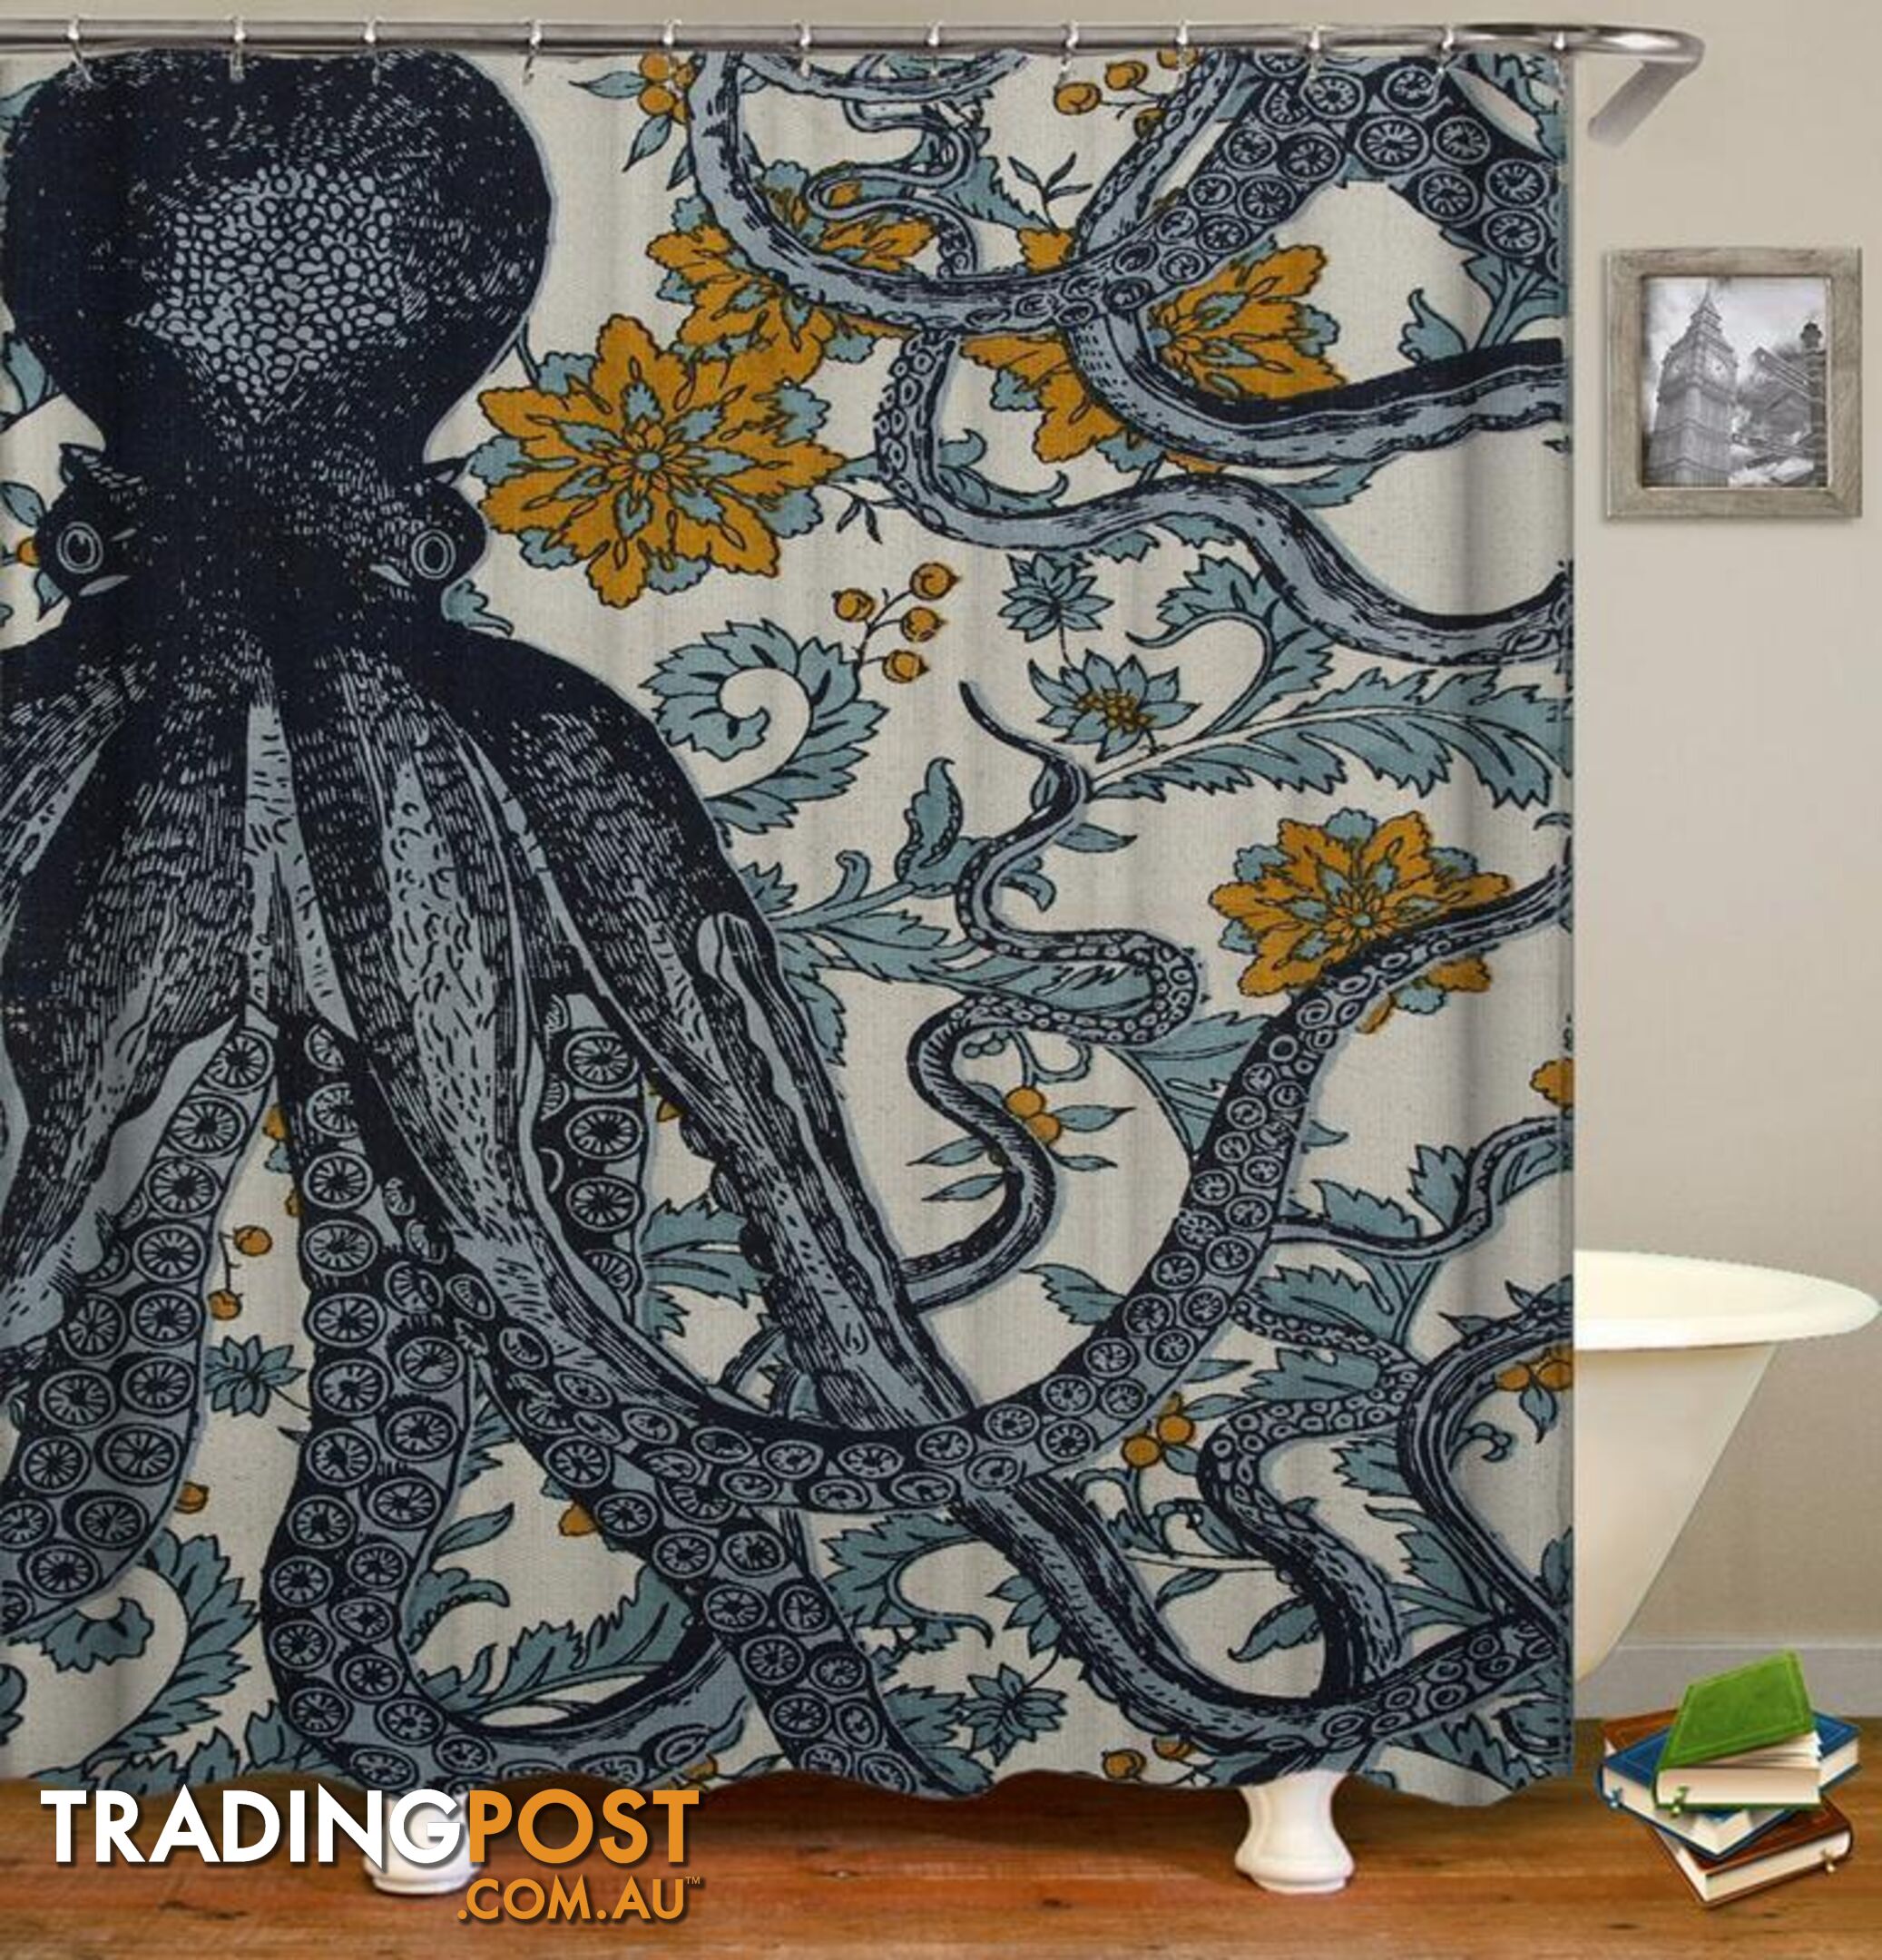 Vintage Octopus Flowery Background Shower Curtain - Curtain - 7427046004275